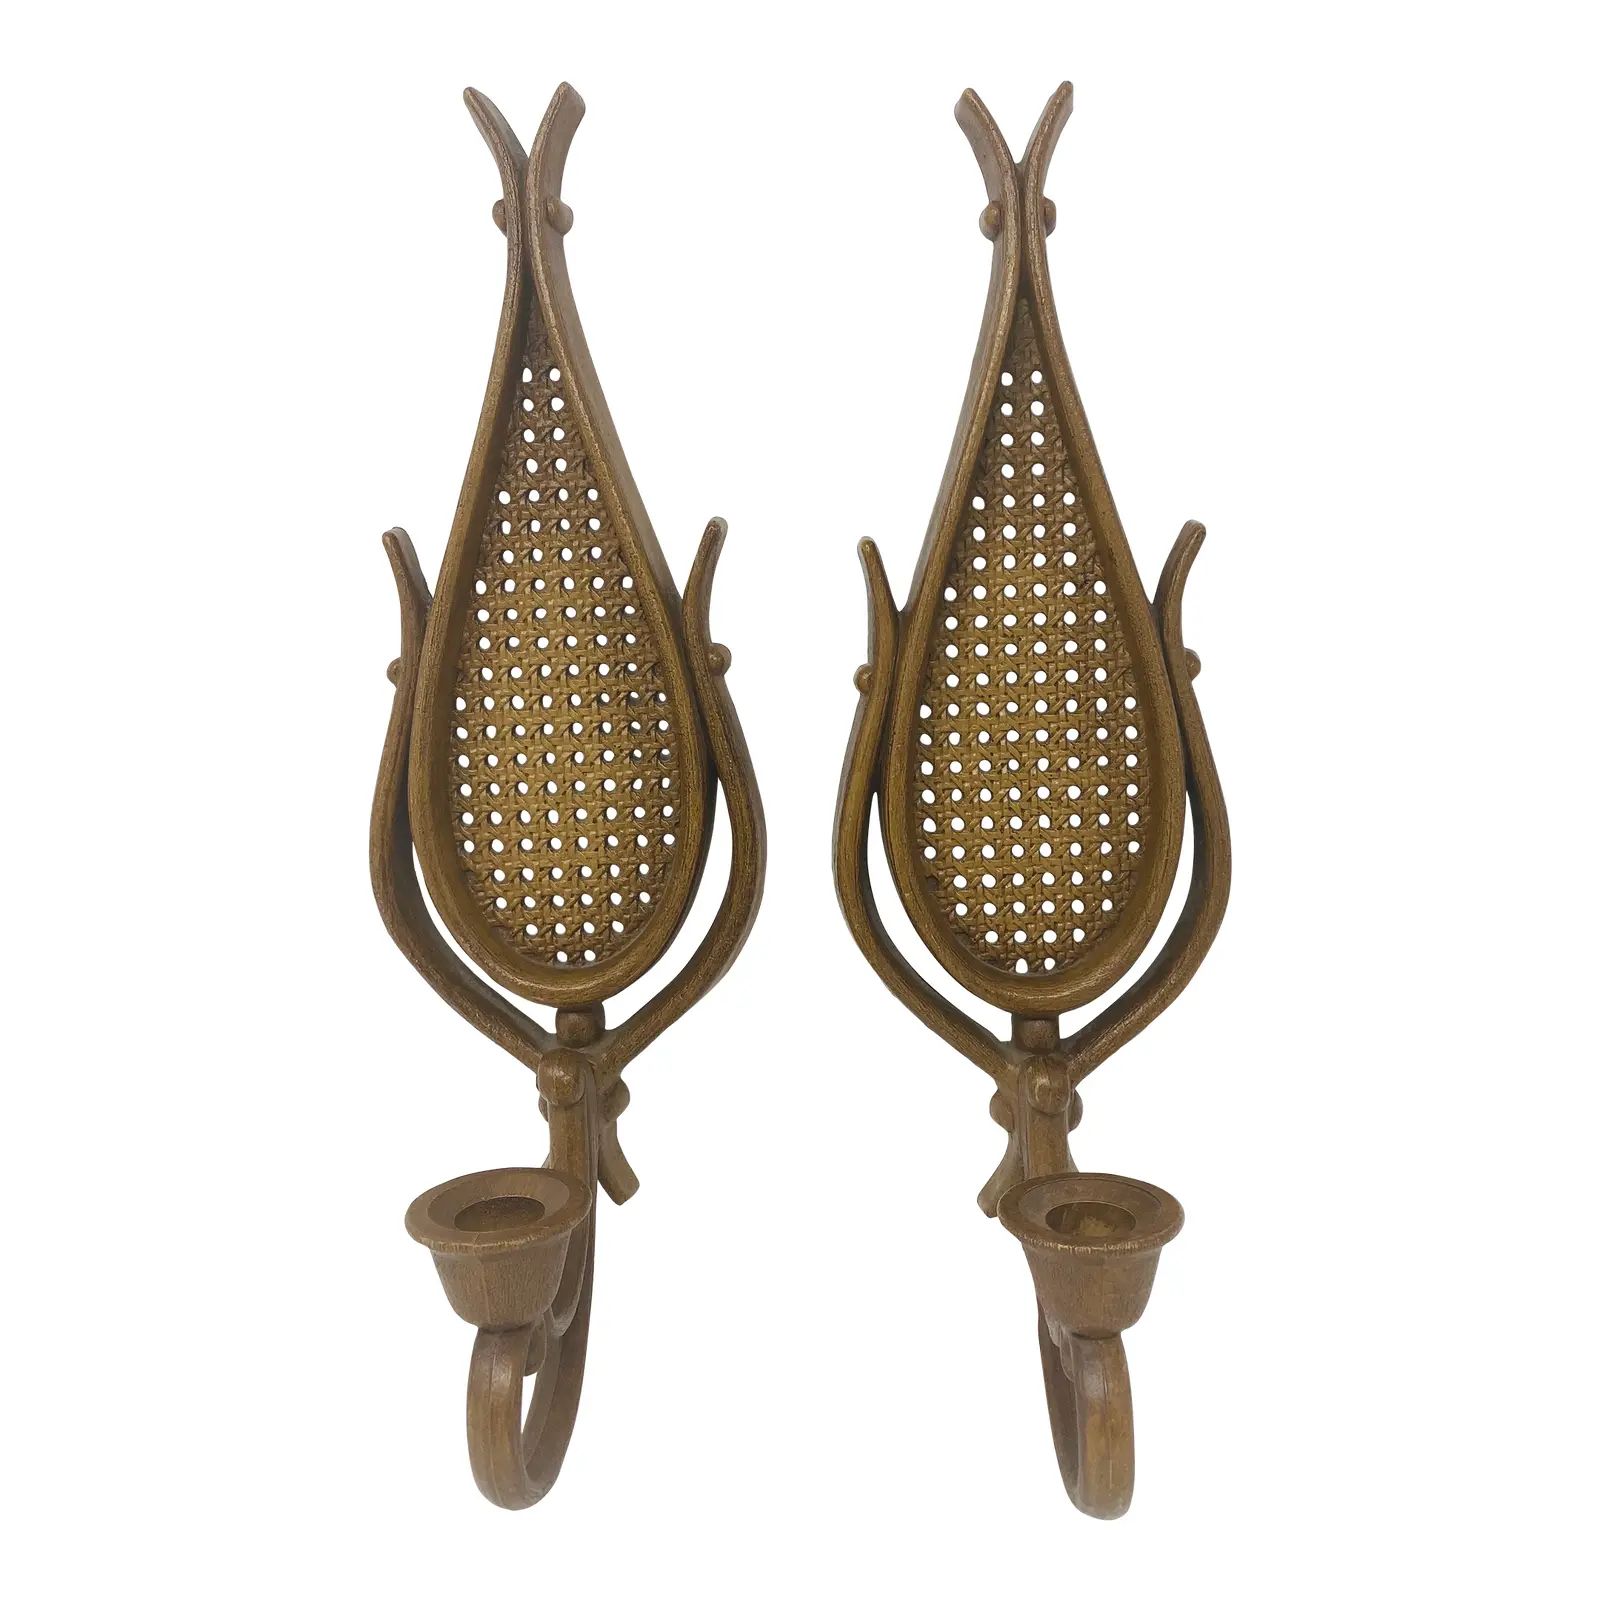 Vintage Homco Faux Wood and Caning Wall Candle Sconces- a Pair | Chairish